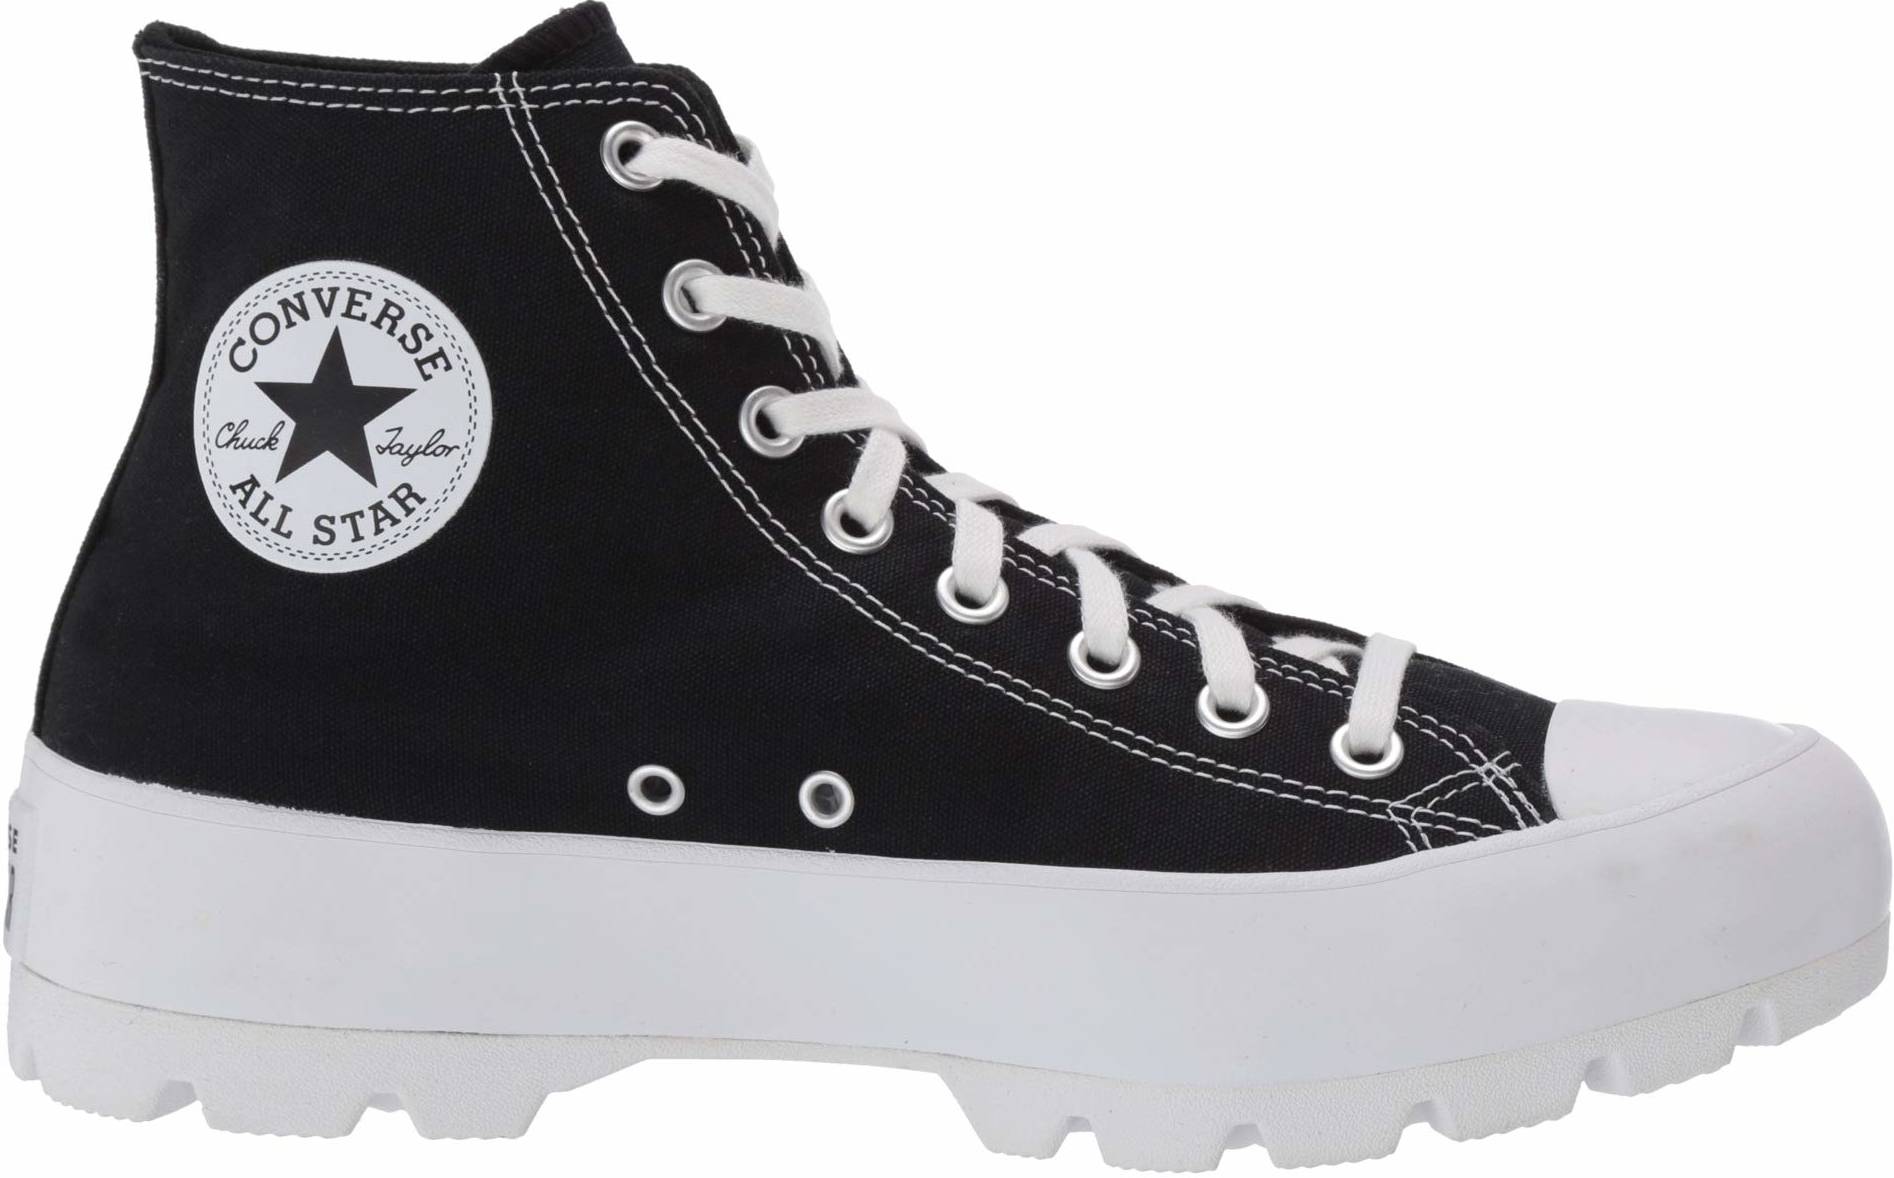 Converse Chuck Taylor All Star Lugged High Top sneakers in white + ... صحن كنافة